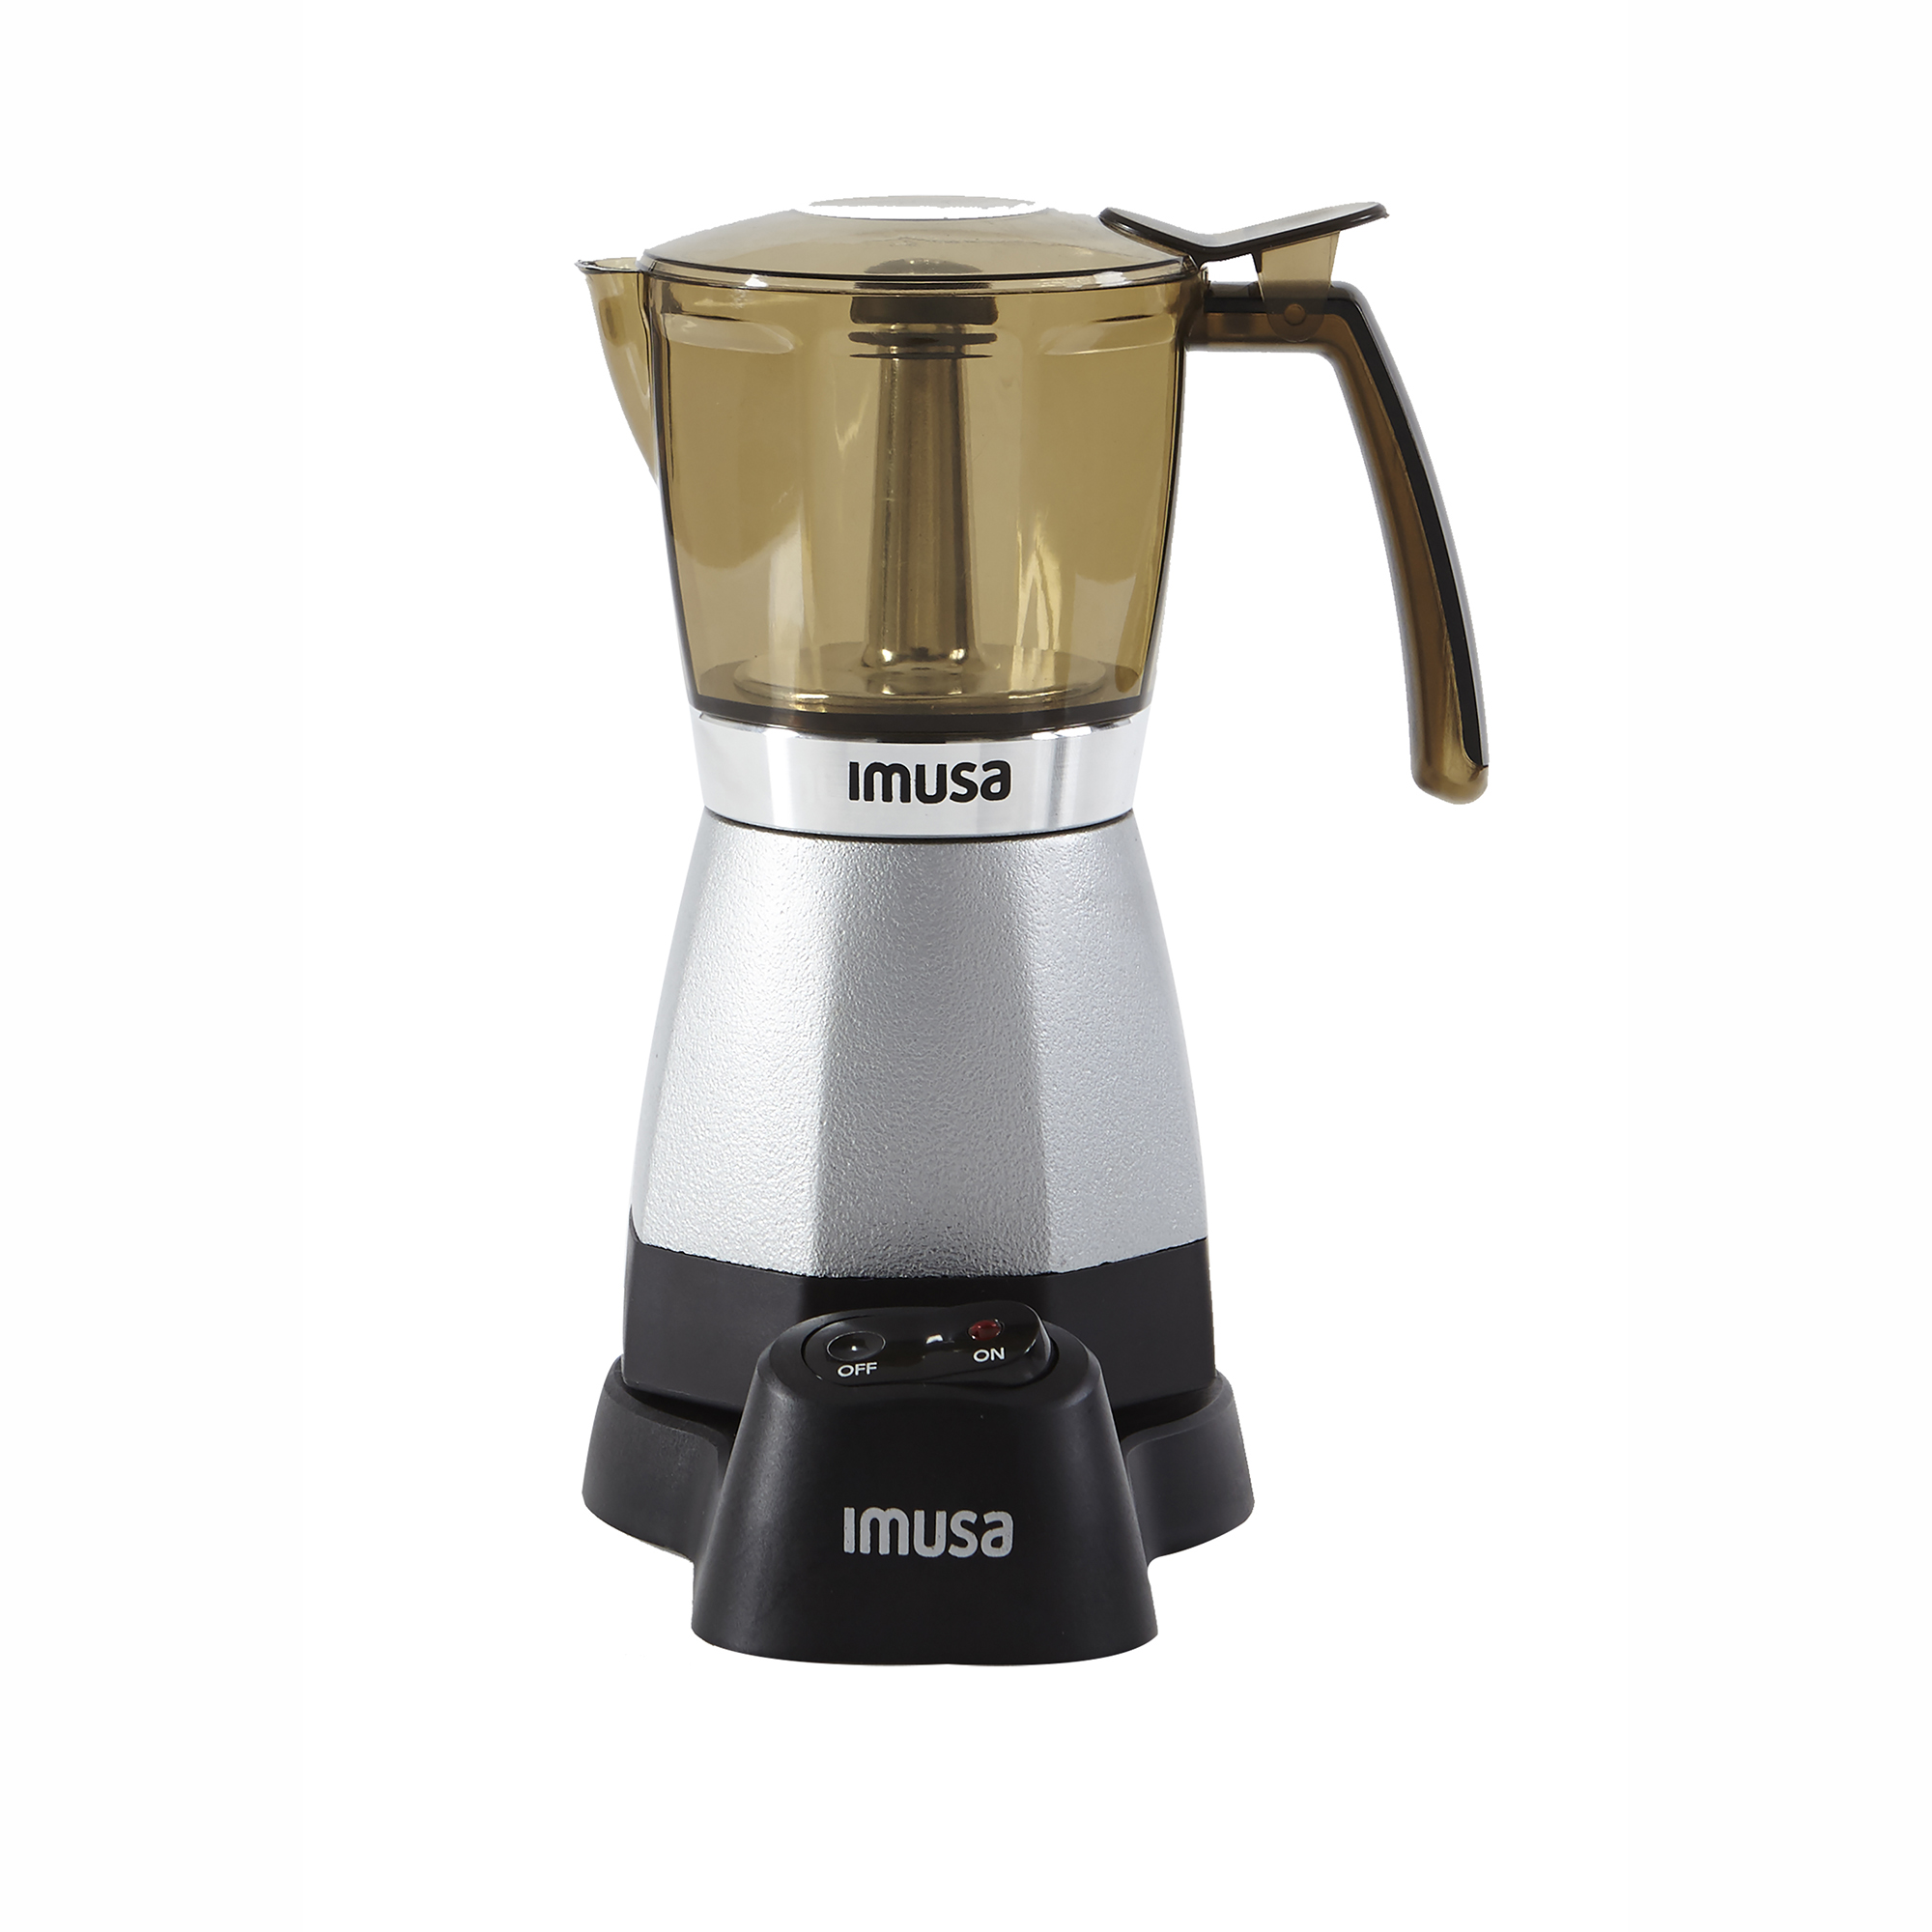 Imusa 6-Cup Espresso Coffee Maker with Cool Touch Handle, Silver